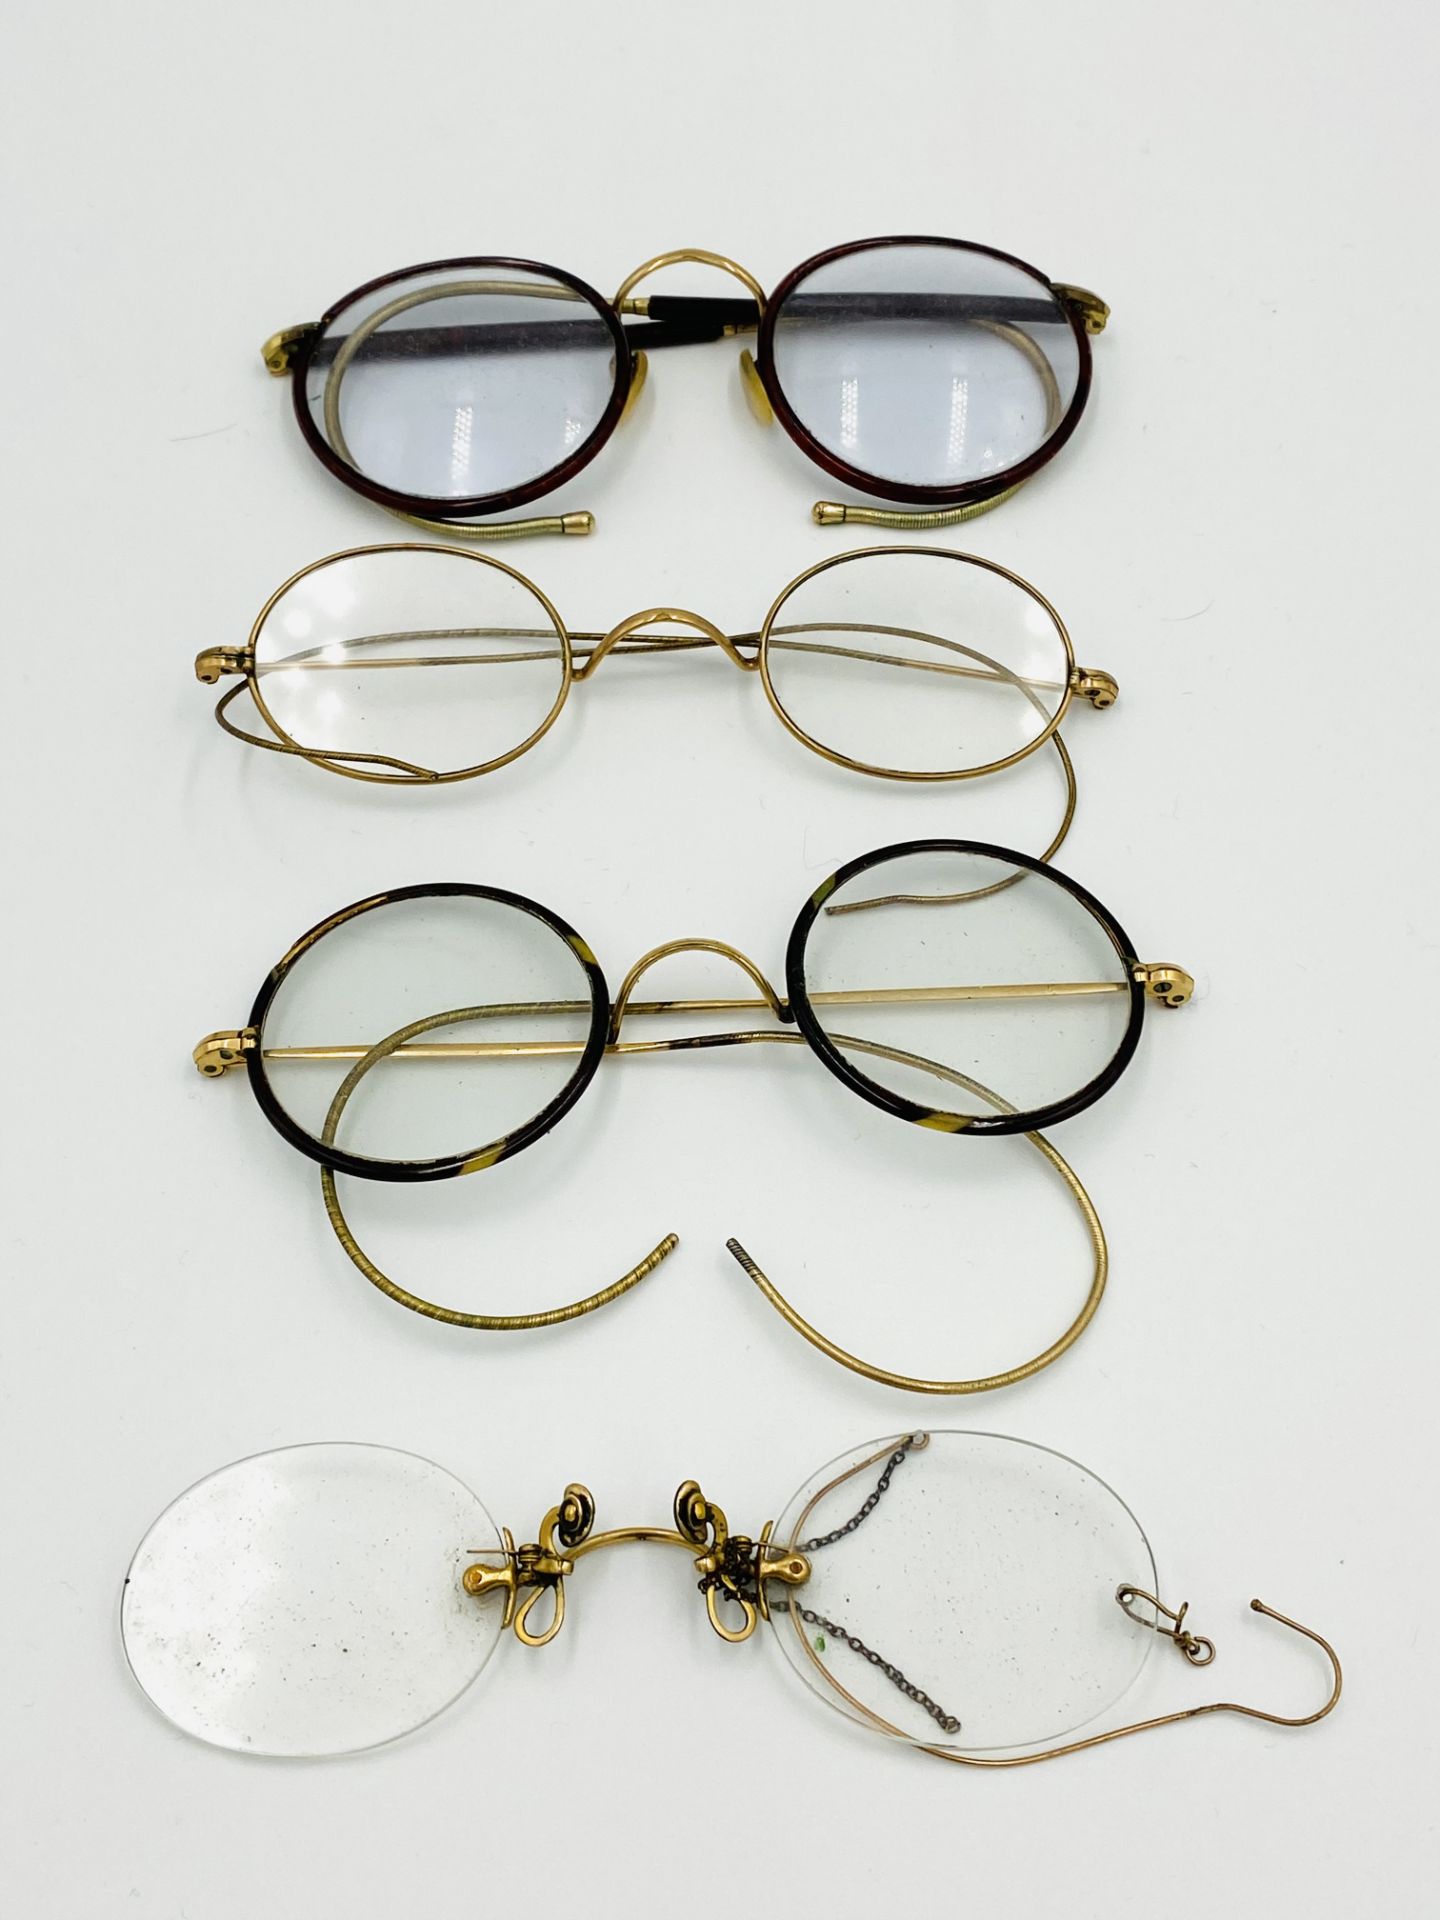 Three pairs of spectacles and a pair of prince nez